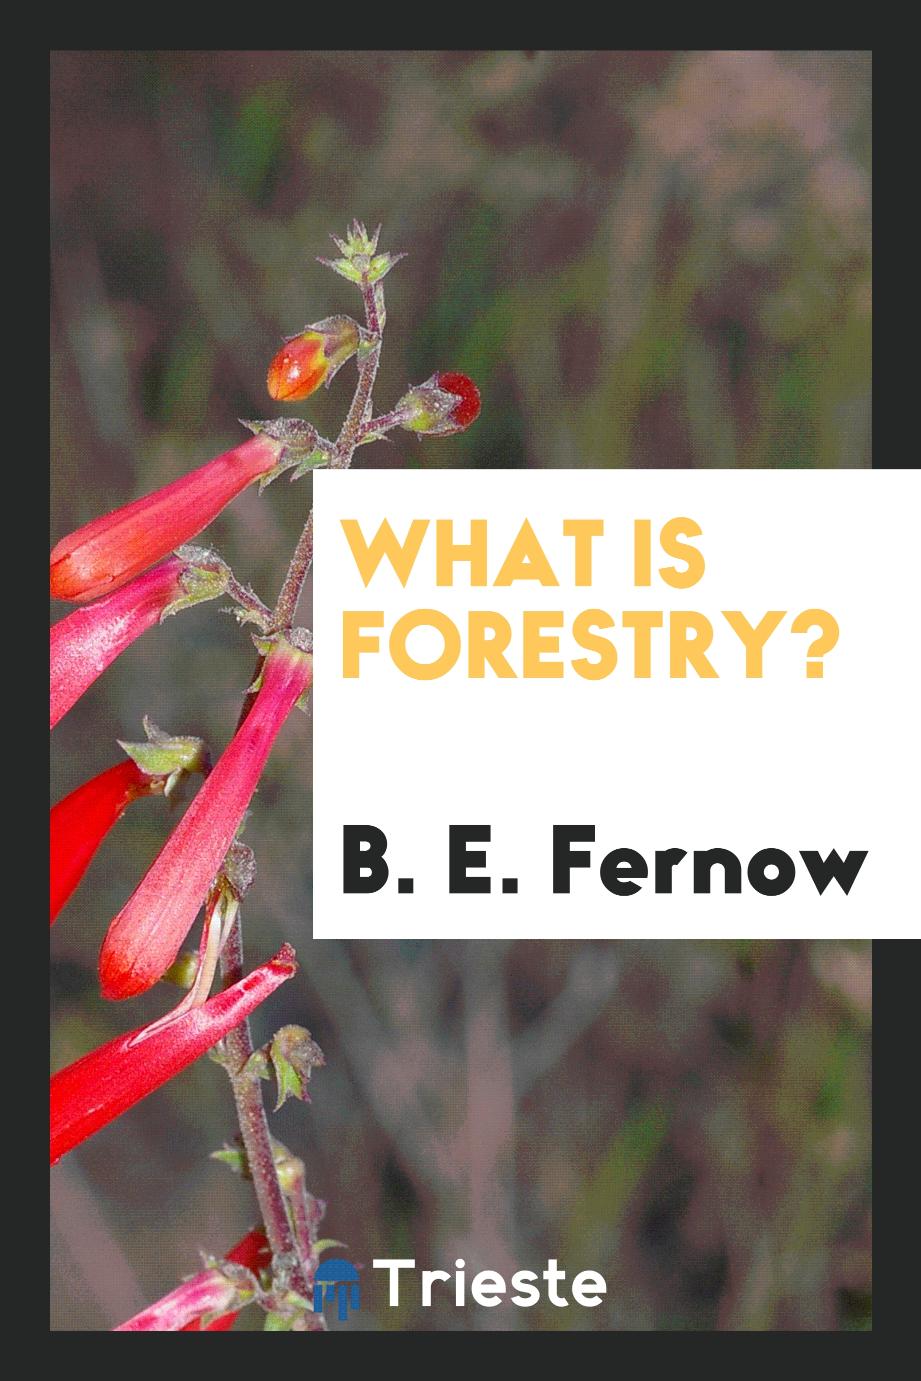 What is forestry?